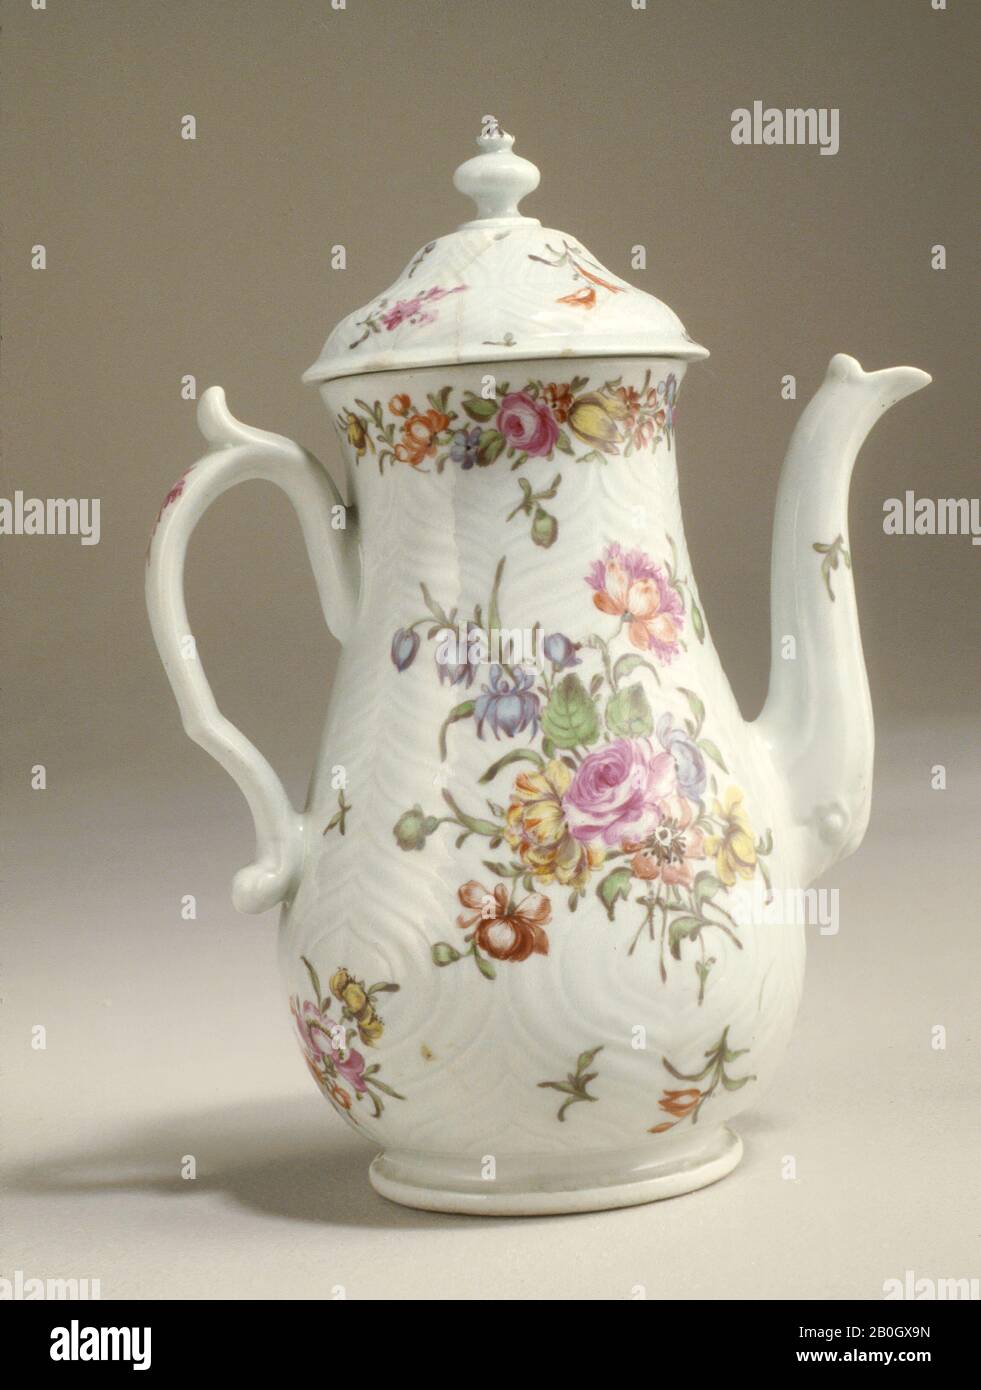 Worcester Porcelain Manufactory, English, 1751–present, Coffeepot and Cover, c. 1760, Soft-paste porcelain, 8 x 6 3/16 x 1 9/16 in. (20.3 x 15.7 x 4 cm Stock Photo